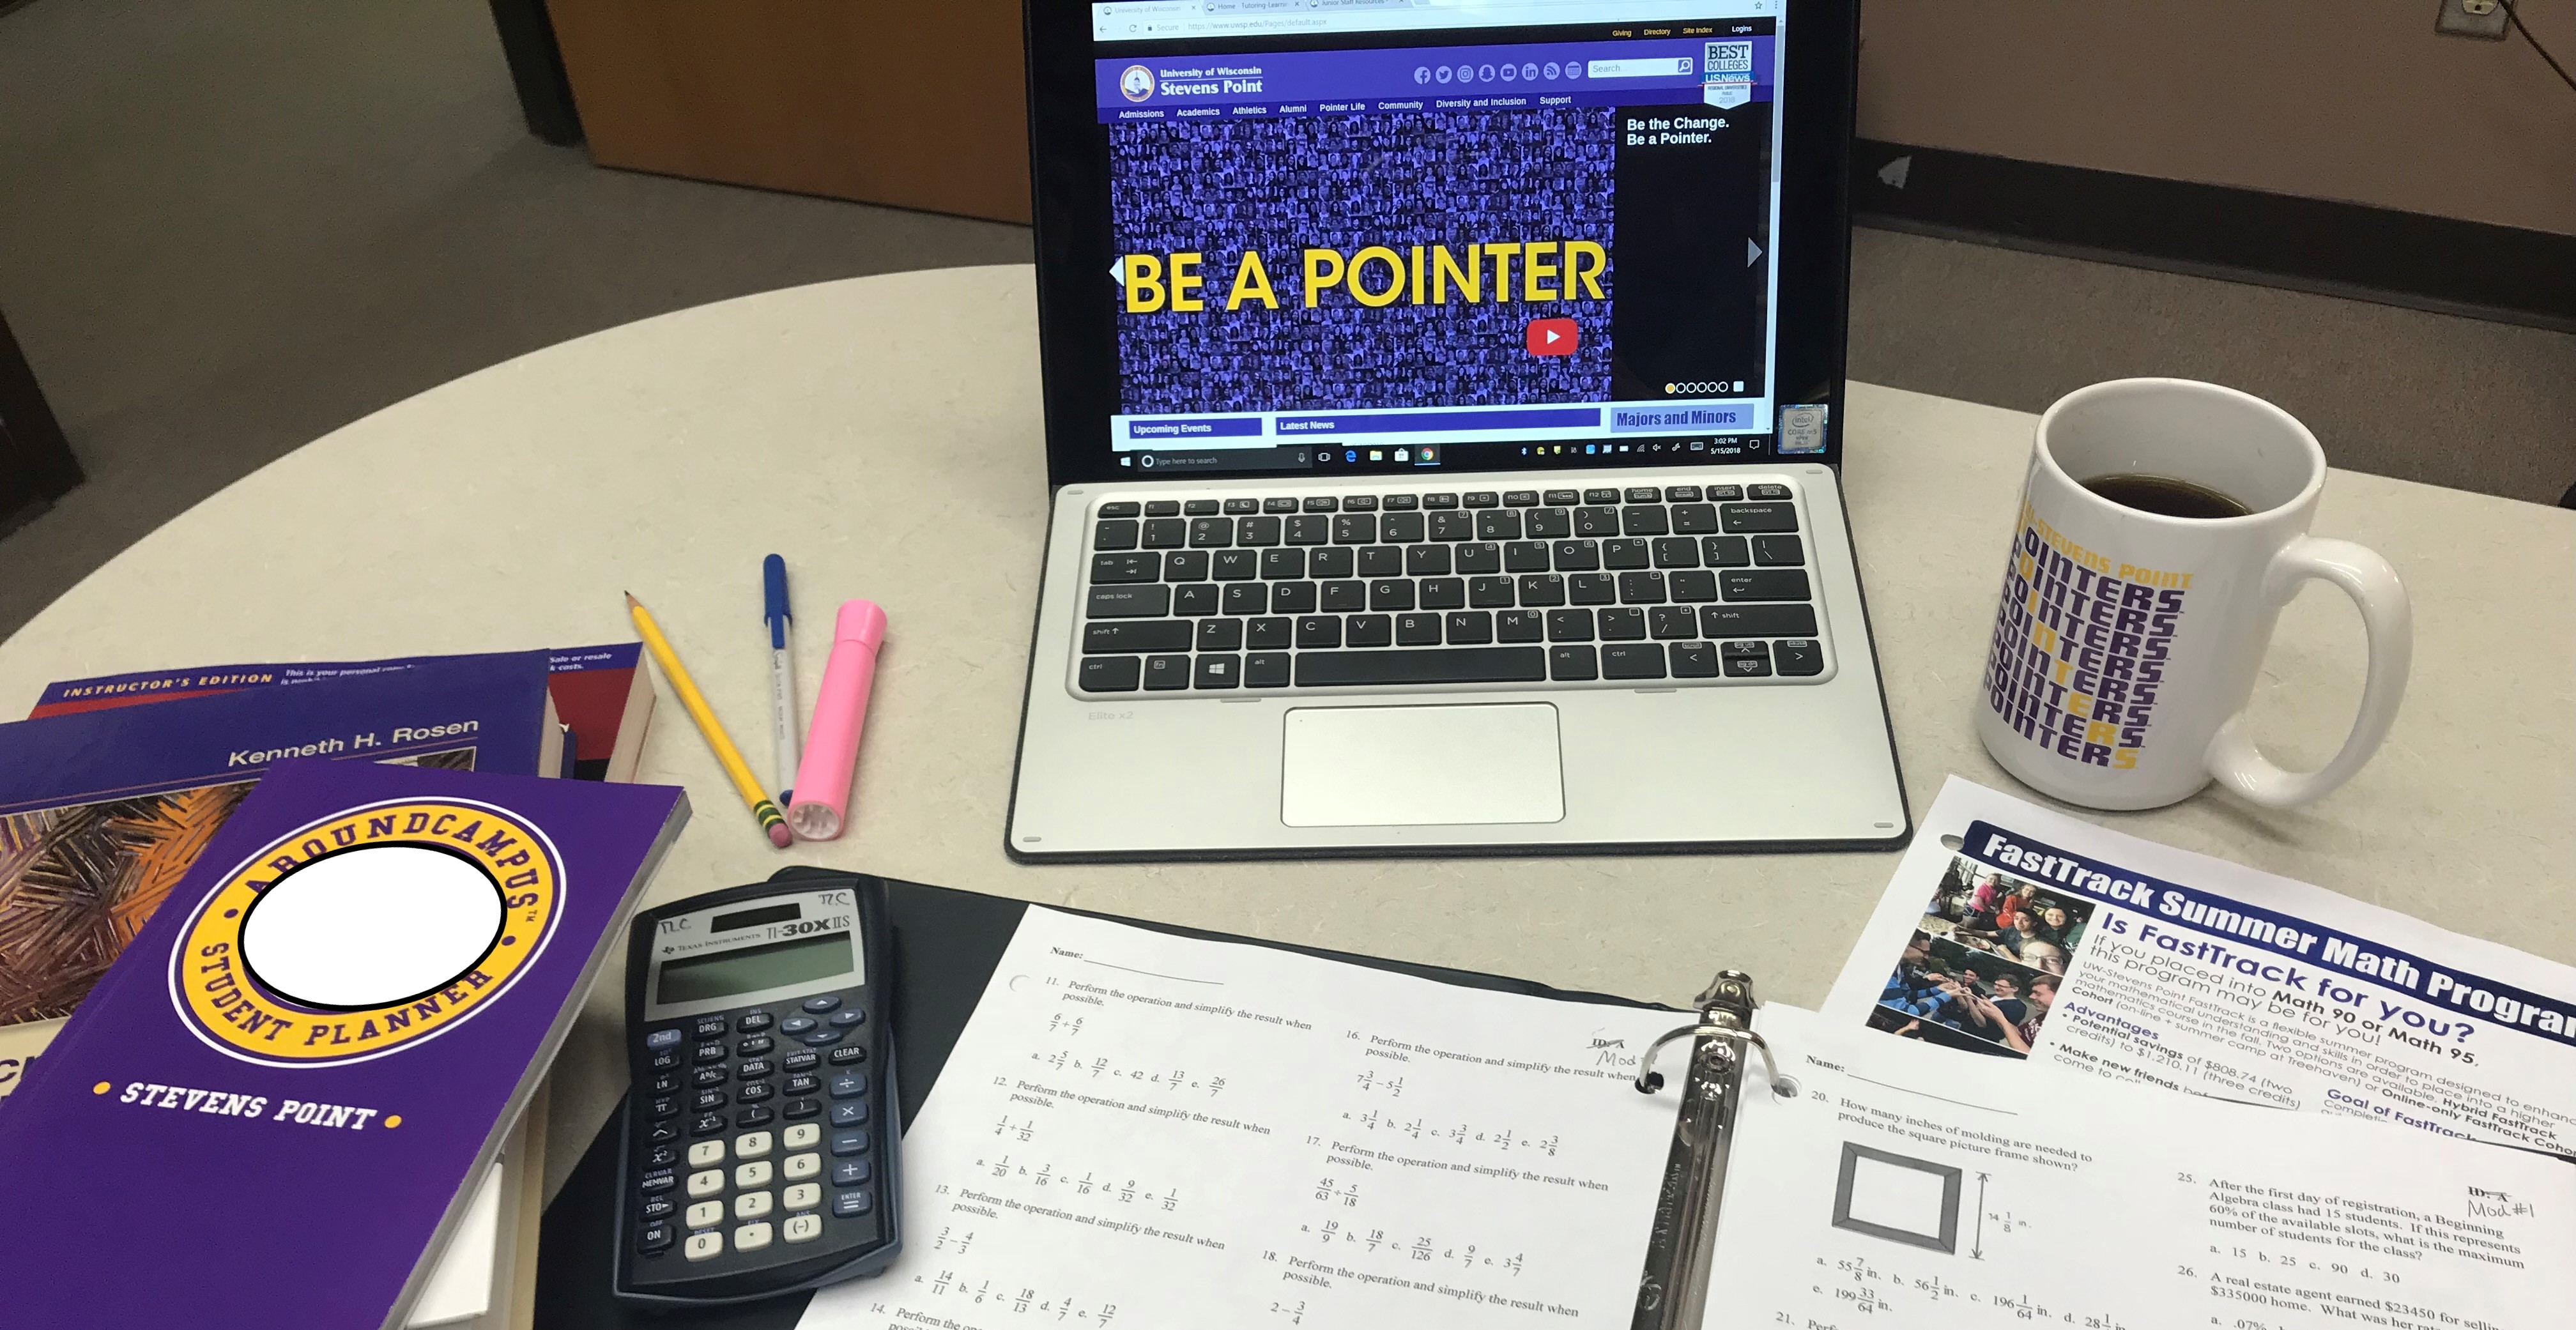 Various items are spread on a tabletop: a purple Stevens Point planner on top of textbooks, a pencil, a blue pen, a pink highlighter, a calculator, a binder opened to pages with math problems on them, a laptop showing the UWSP homepage, and a Pointers mug with coffee in it.